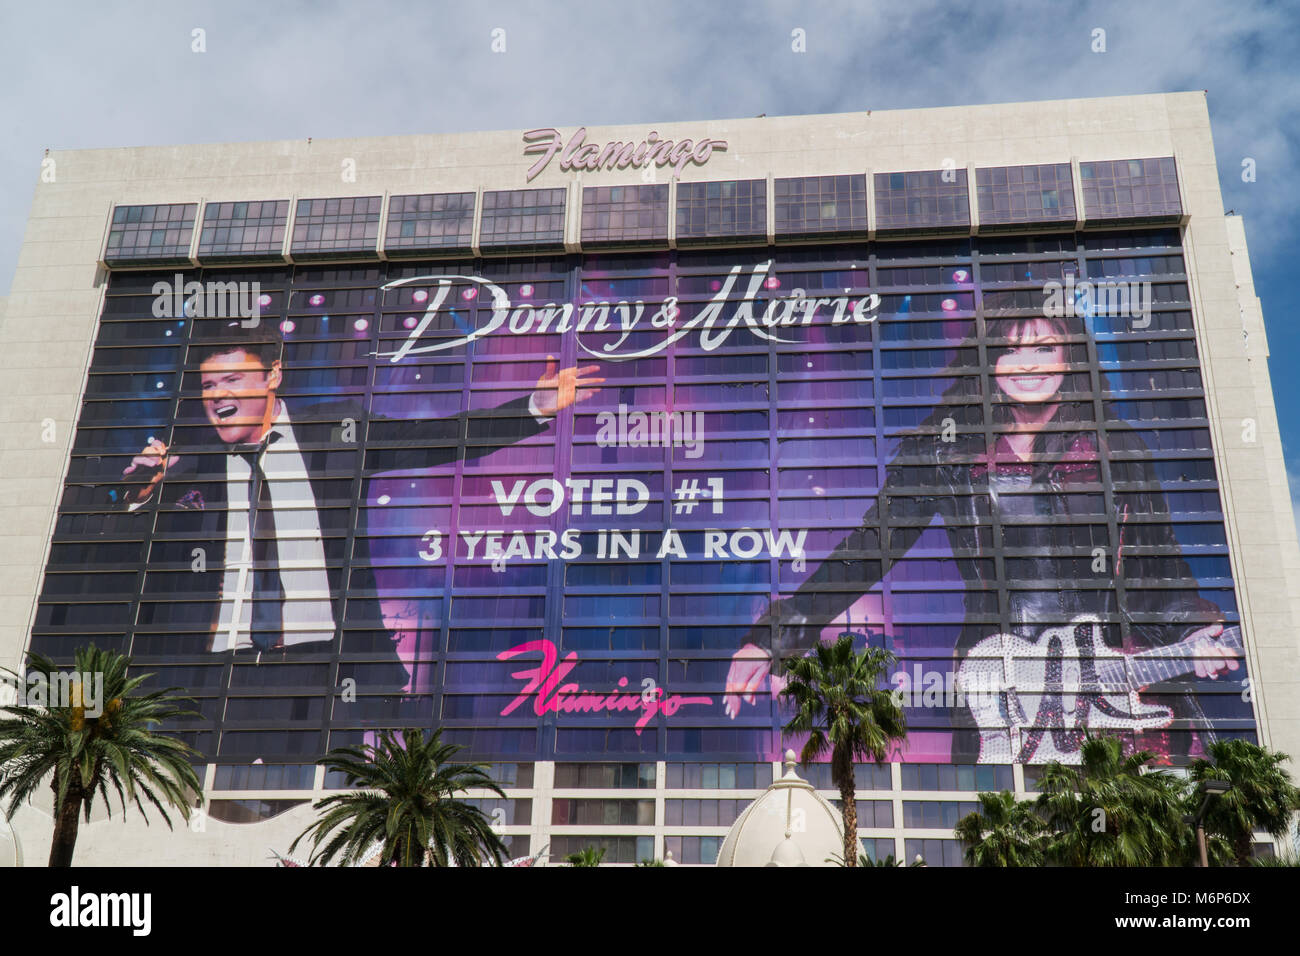 Las Vegas Nevada - Circa 2017: Flamingo hotel and casino exterior daytime facade. Tower billboard for Donny and Marie Osmond painted over room windows Stock Photo